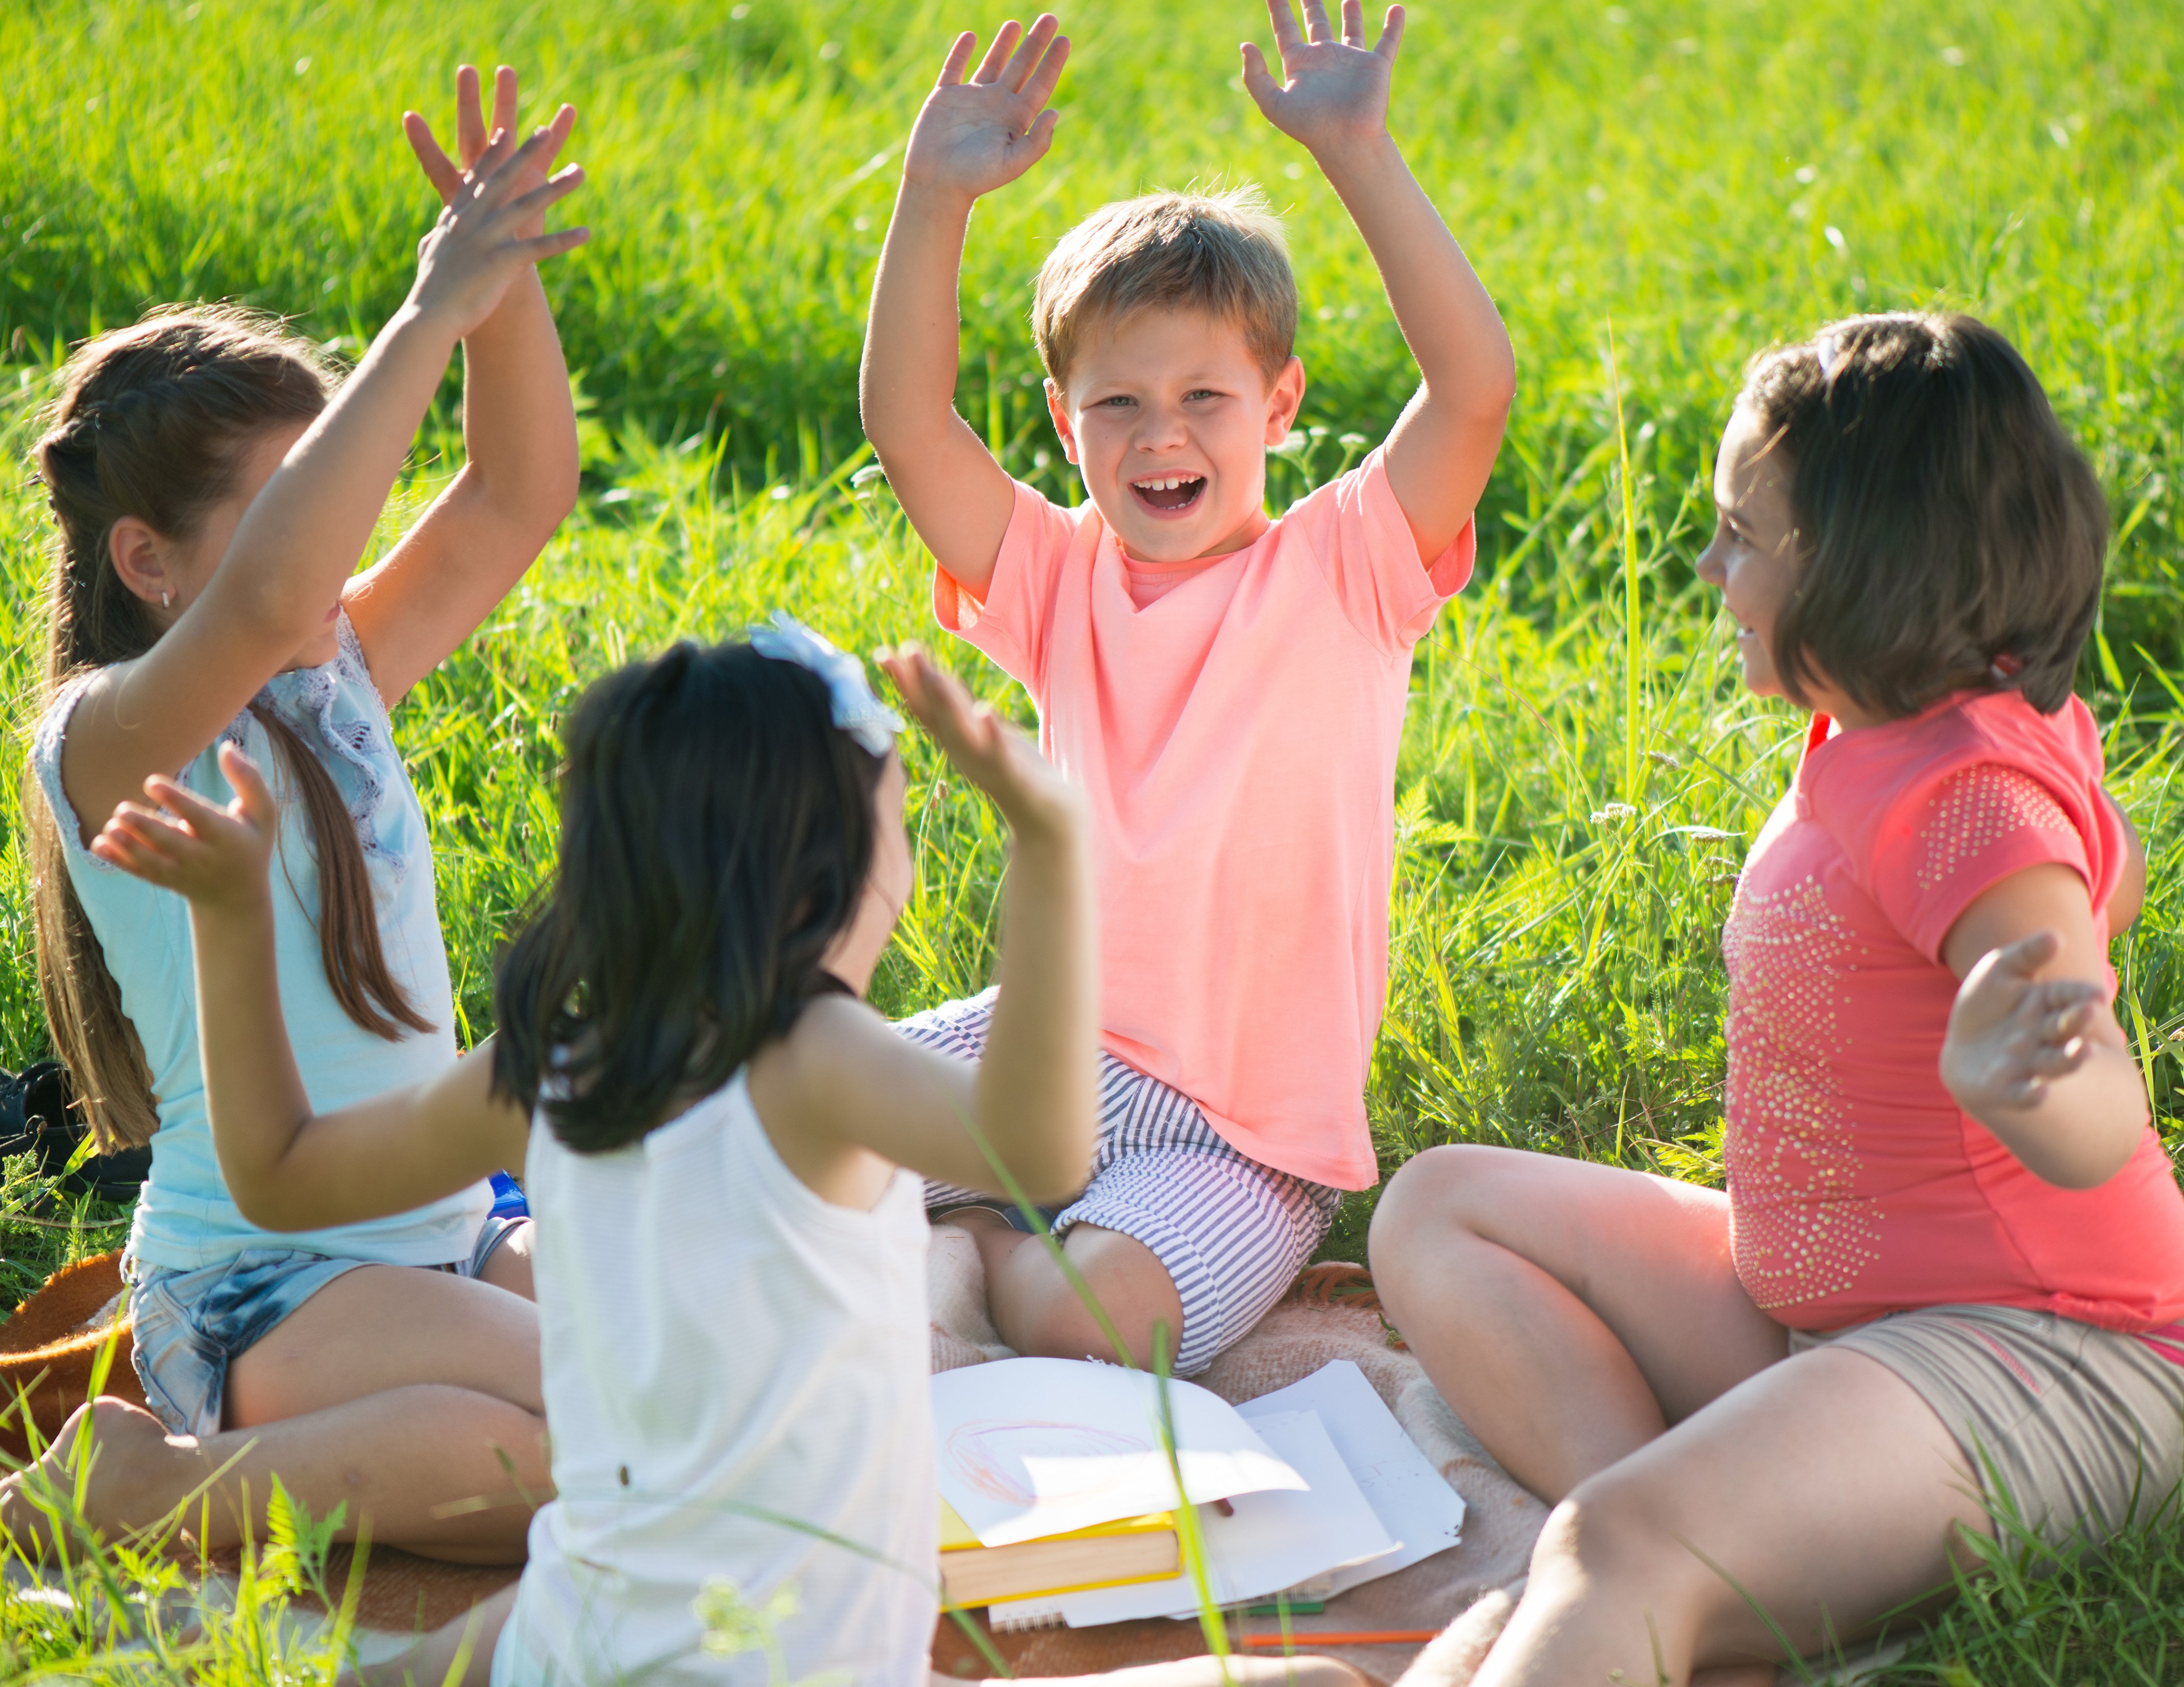 four kids sitting in a grass field playing a game with their hands in the air